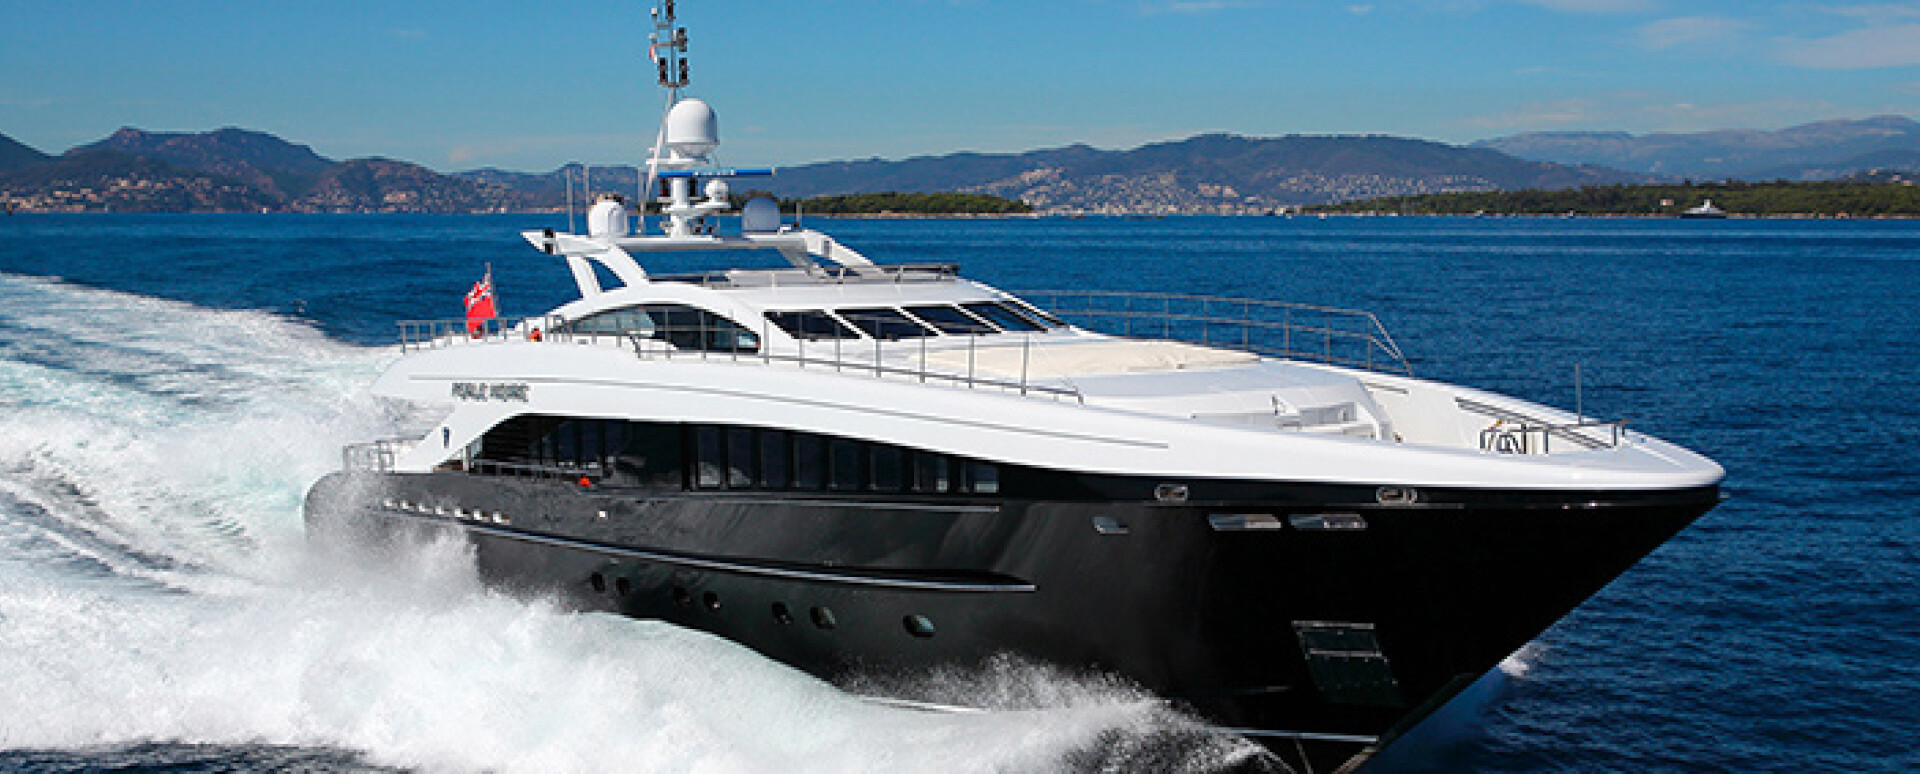                                                                                                     PERLE NOIRE: A Further € 300,000 Price Drop! 
                                                                                            